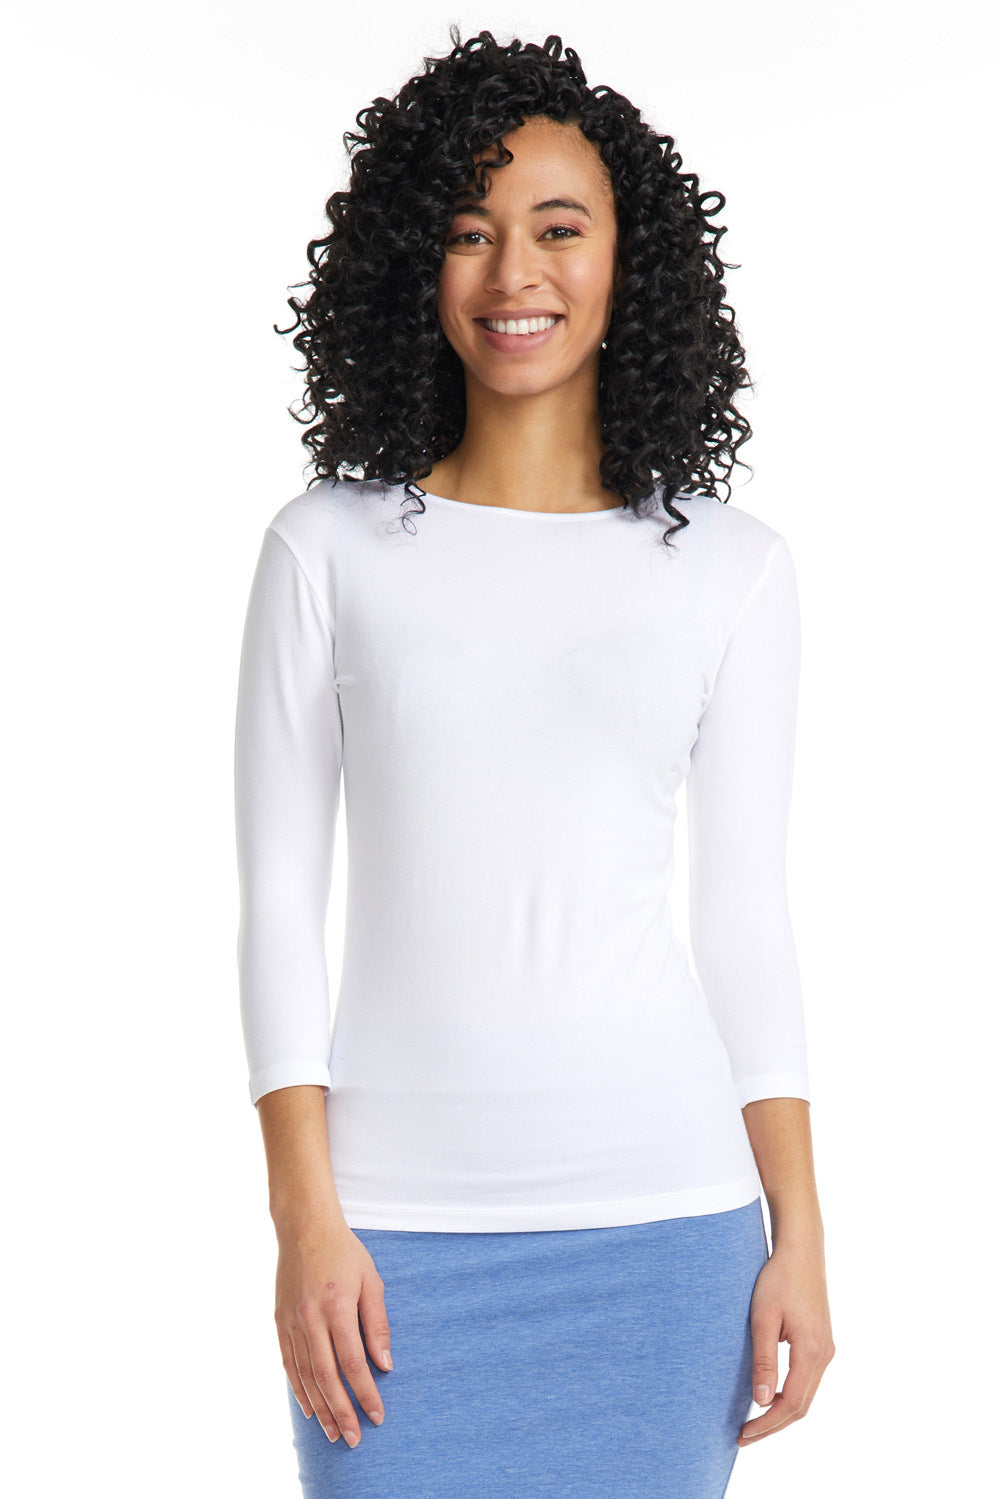 3/4 Sleeve Fitted Layering Top for Women- WHITE